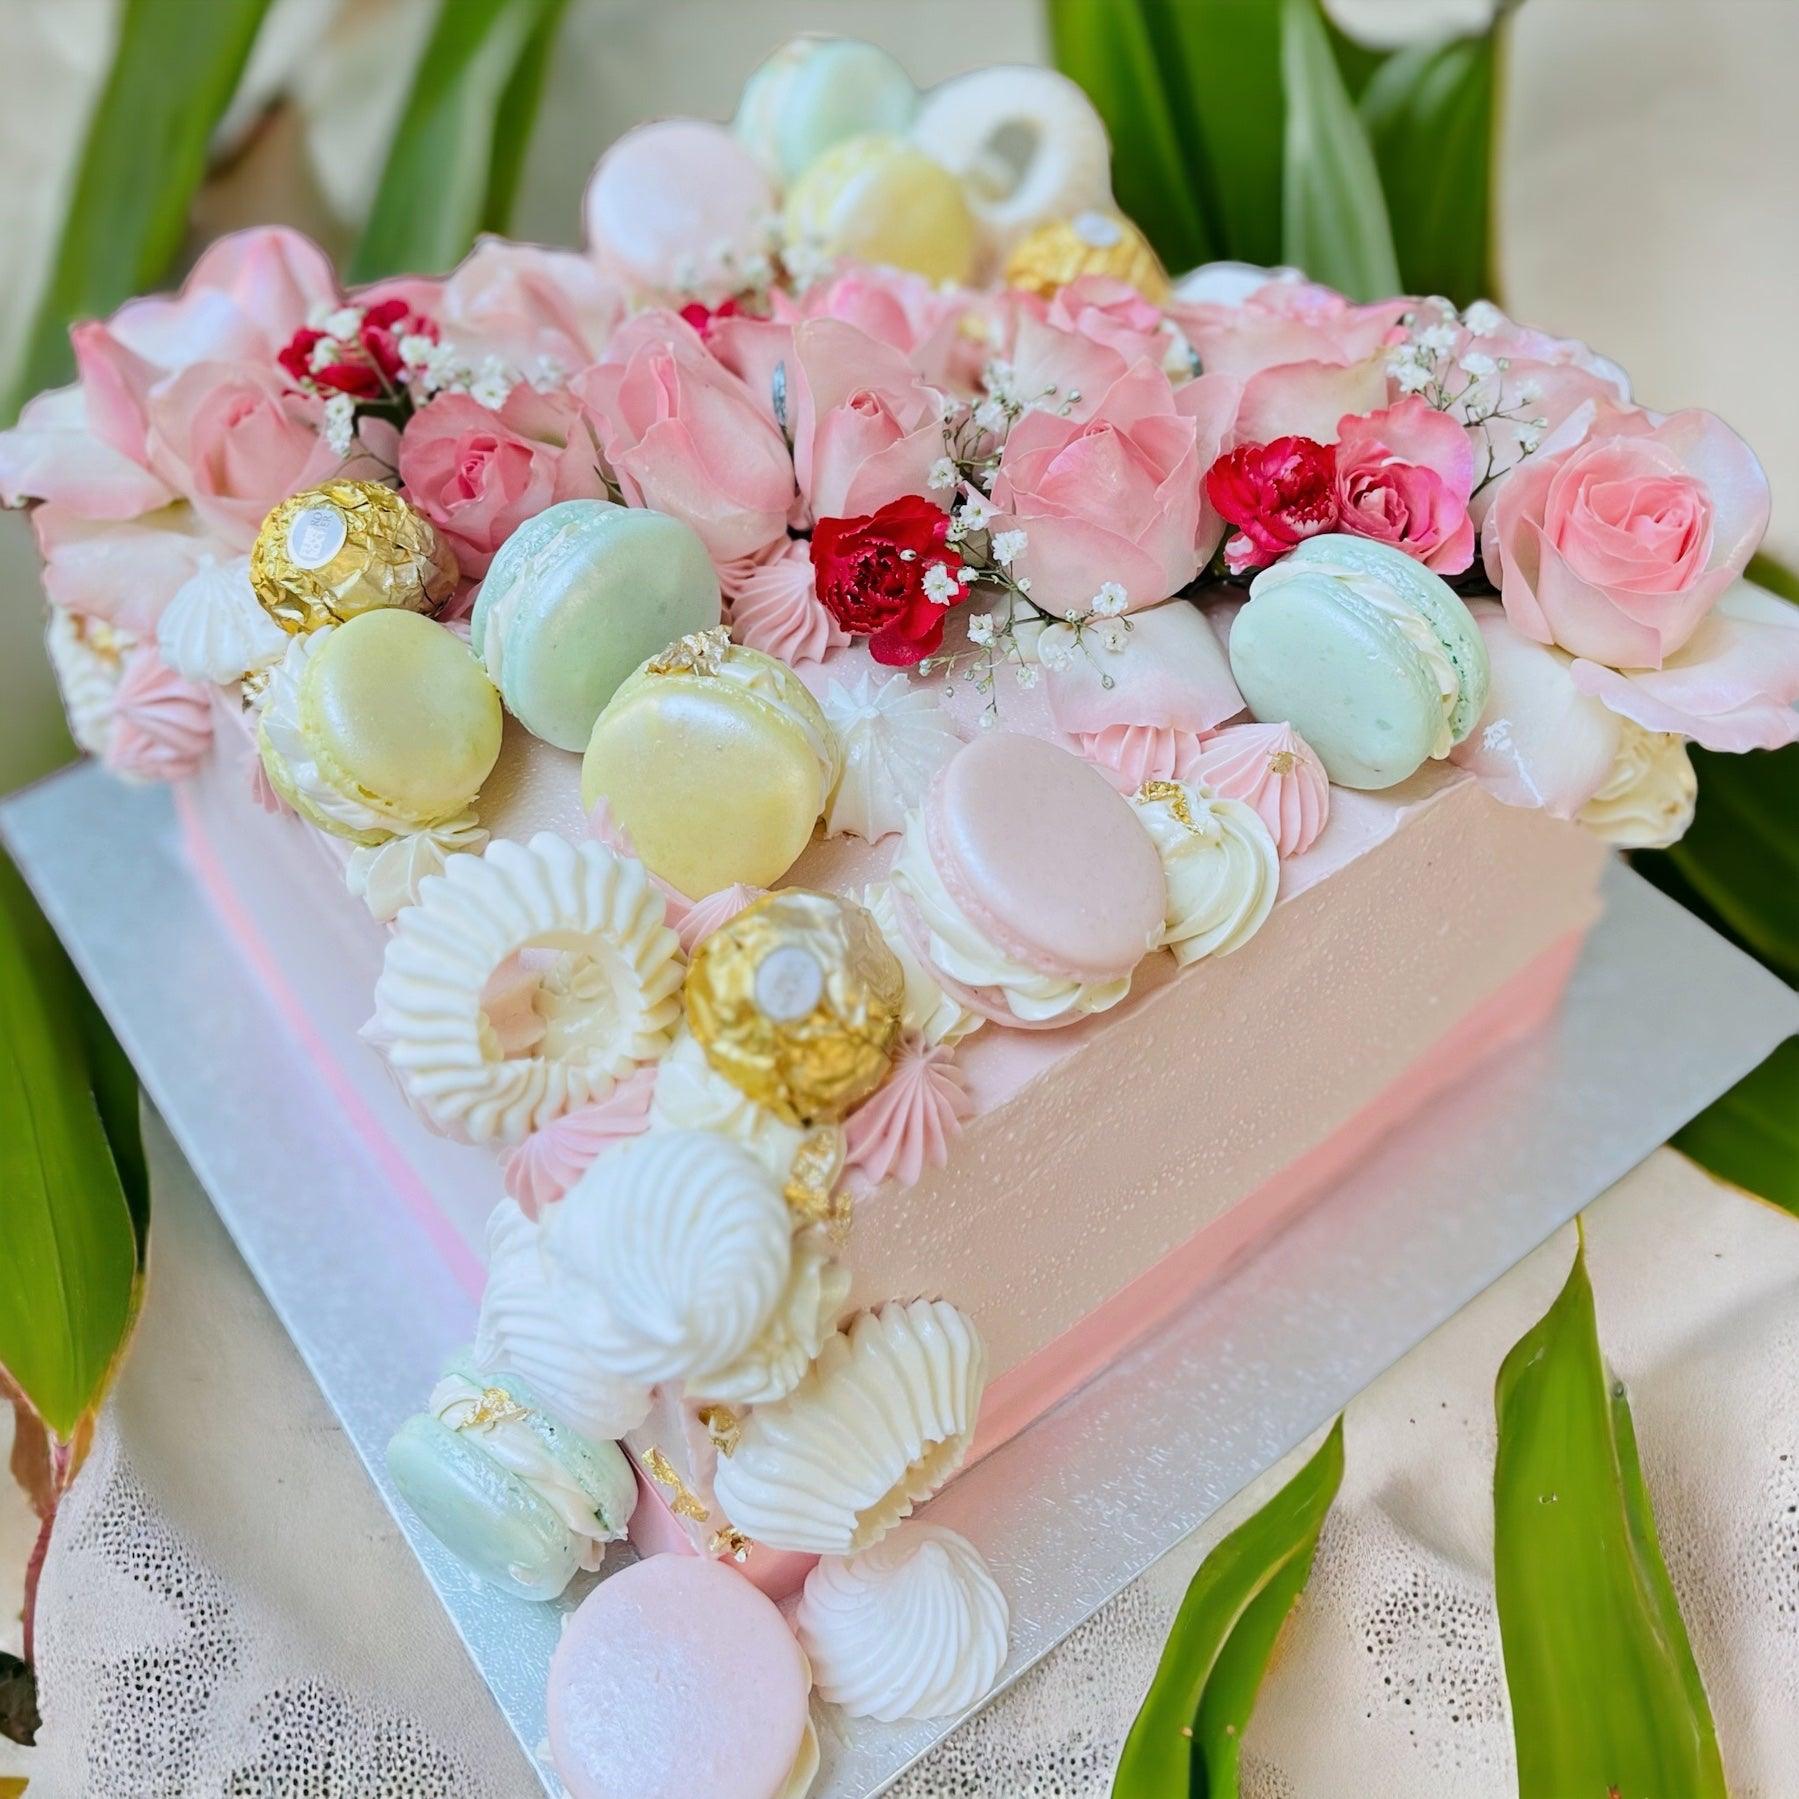 BIRTHDAY CAKE WITH MACARONS - Naturally_deliciousss